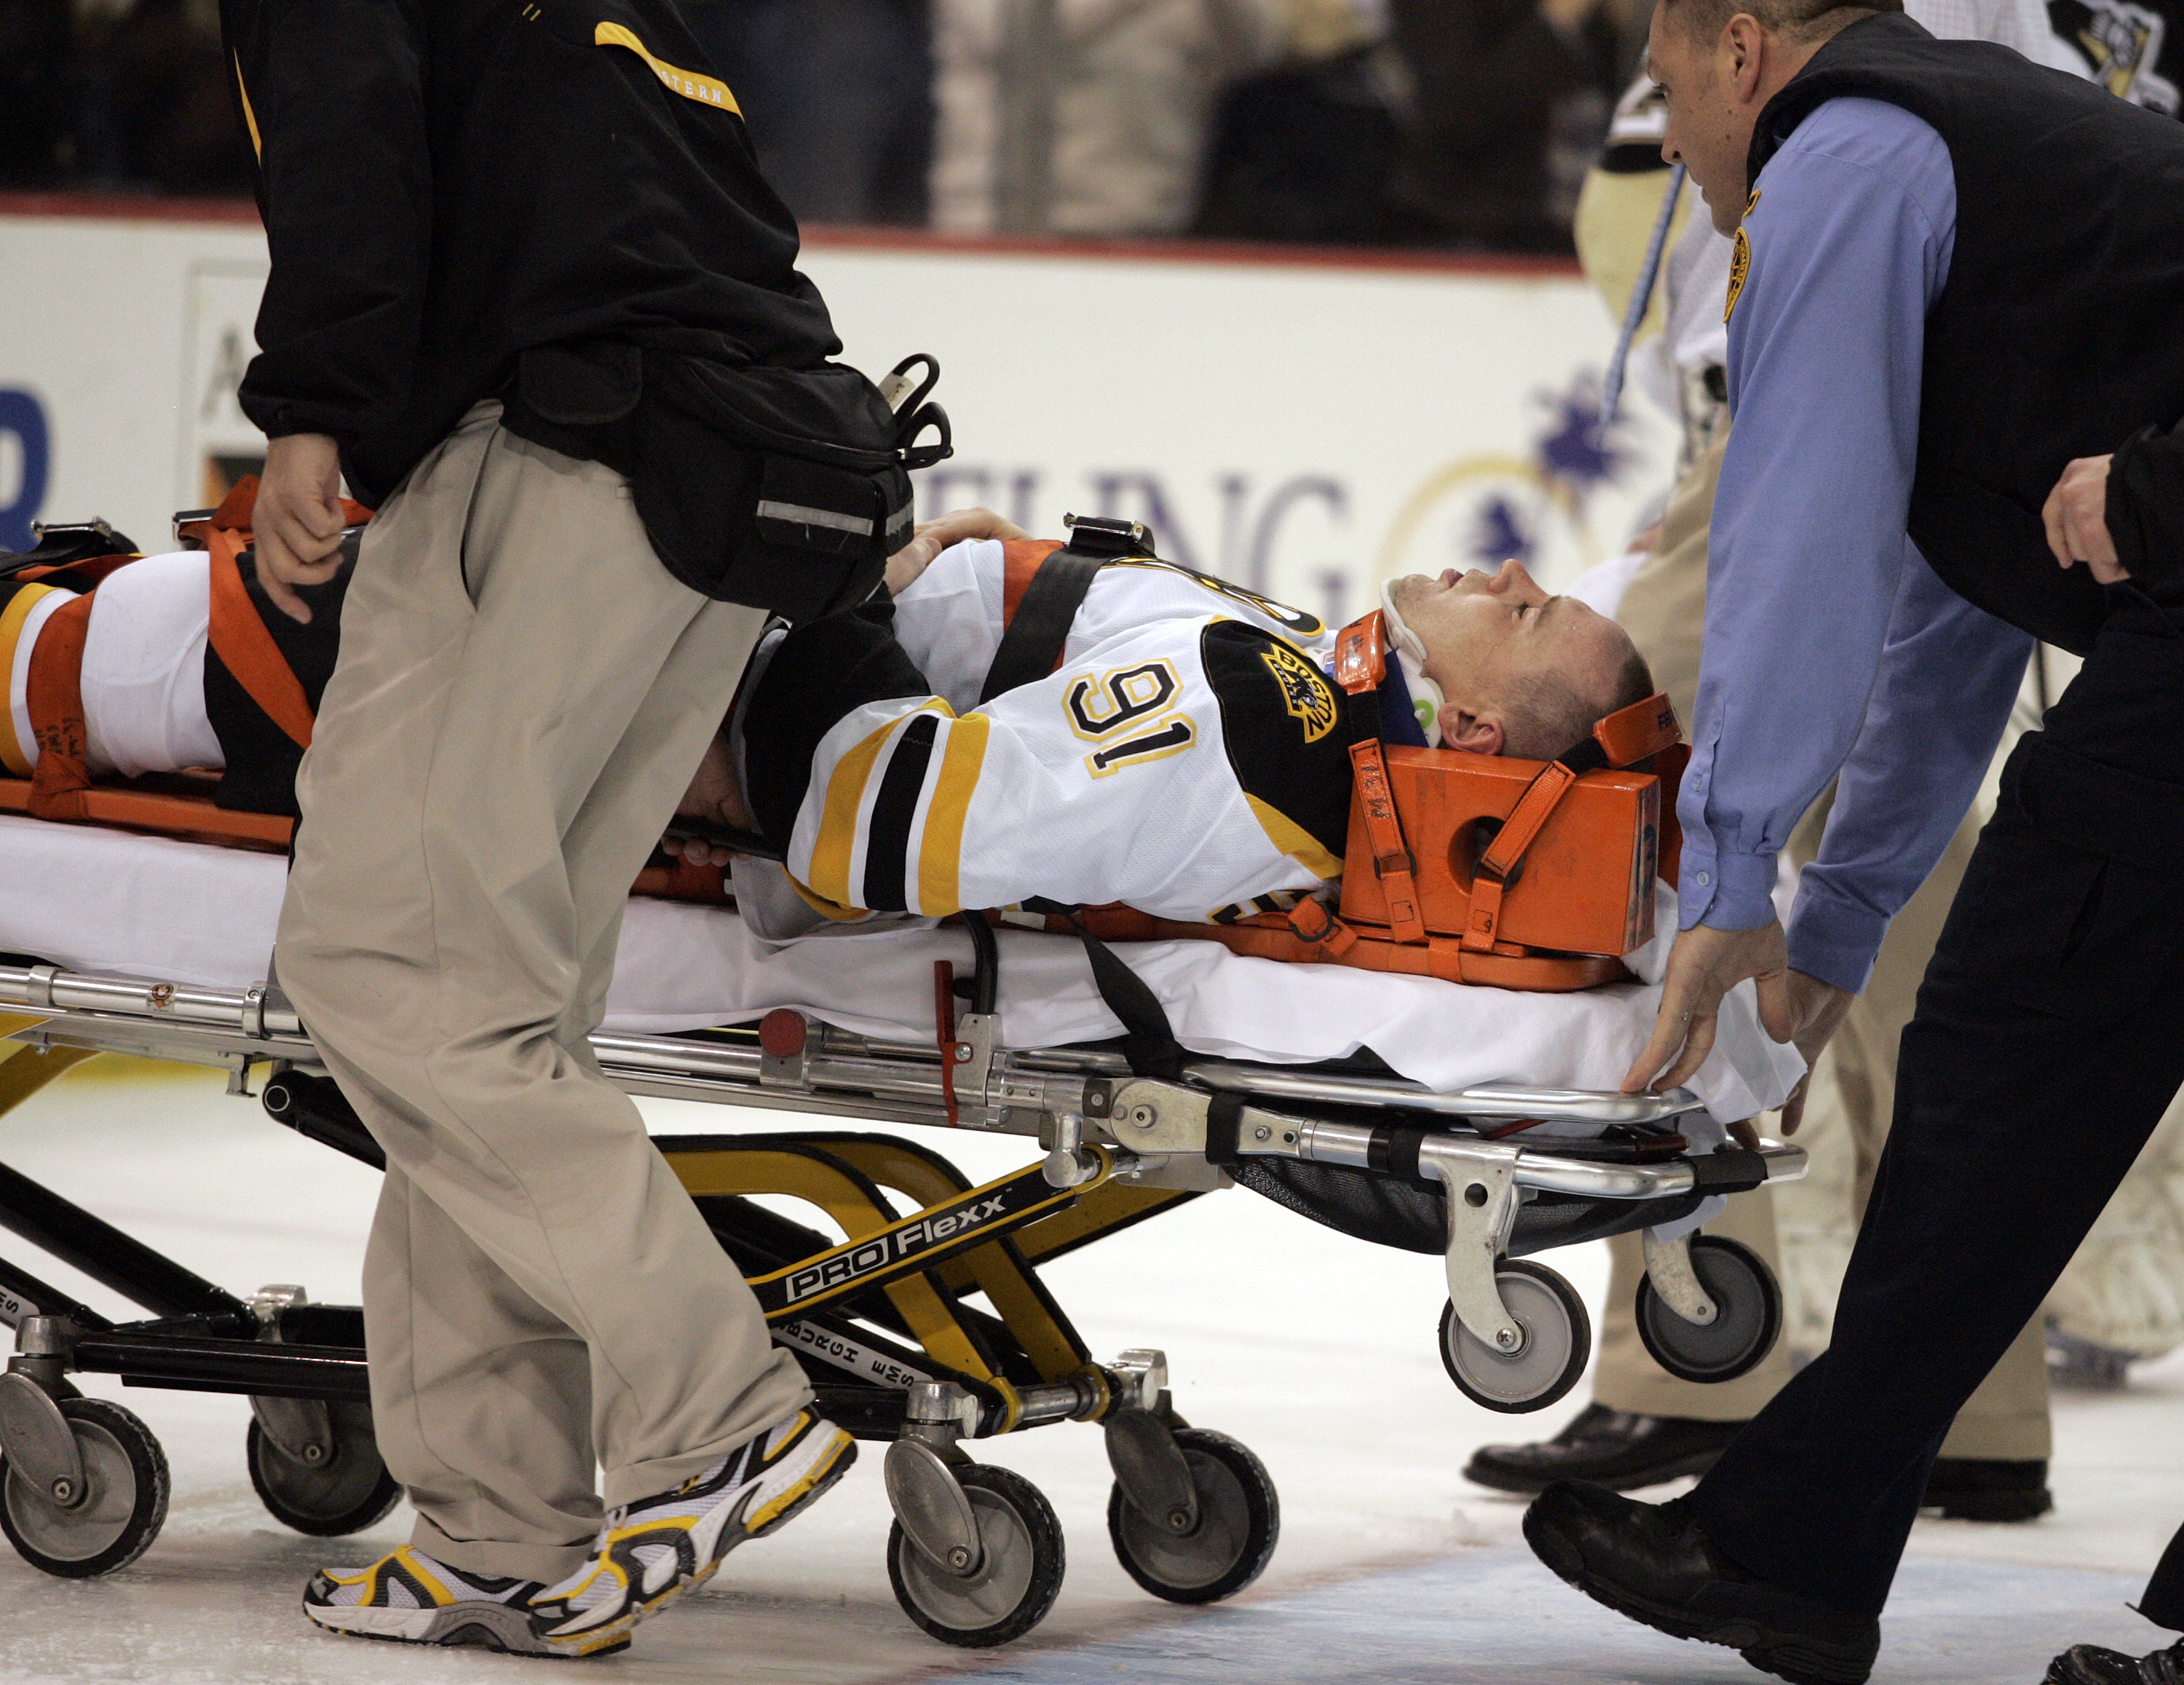 PITTSBURGH, PA - MARCH 07:  Marc Savard #91 of the Boston Bruins is taken off the ice by medical staff after being injured in the third period against the Pittsburgh Penguins at Mellon Arena on March 7, 2010 in Pittsburgh, Pennsylvania.  The Penguins defe